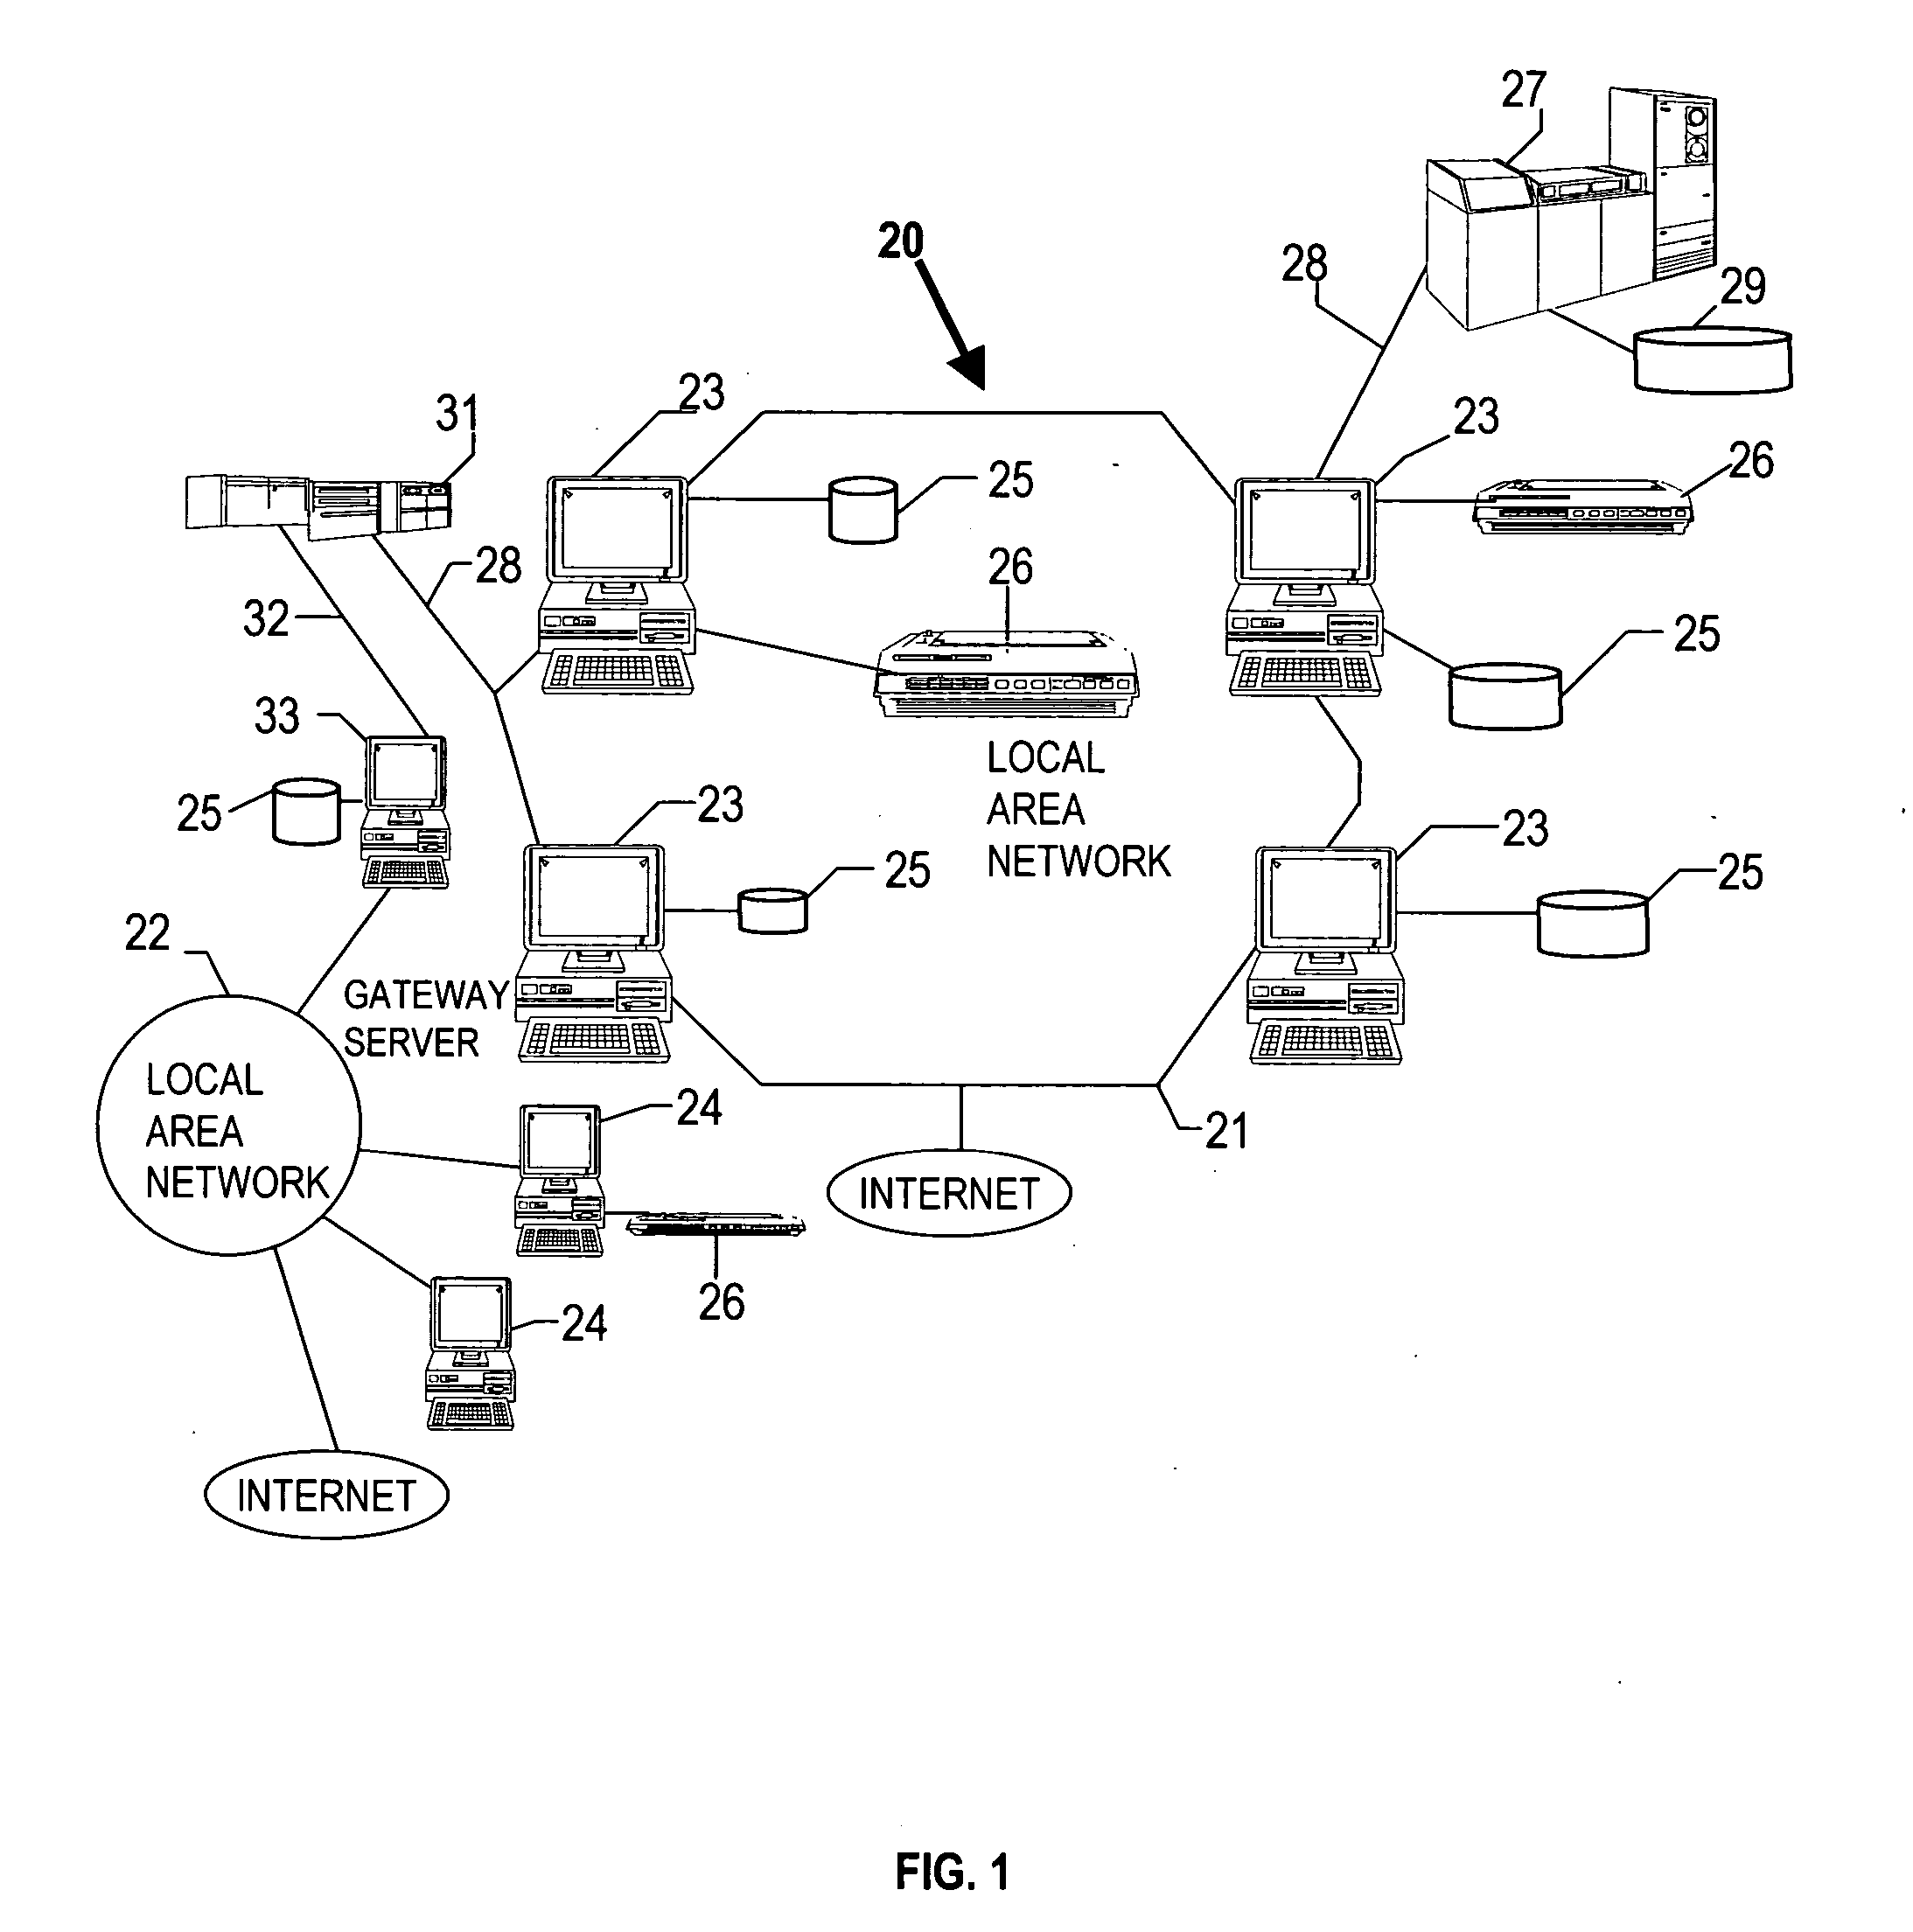 Method and system for load balancing of computing resources